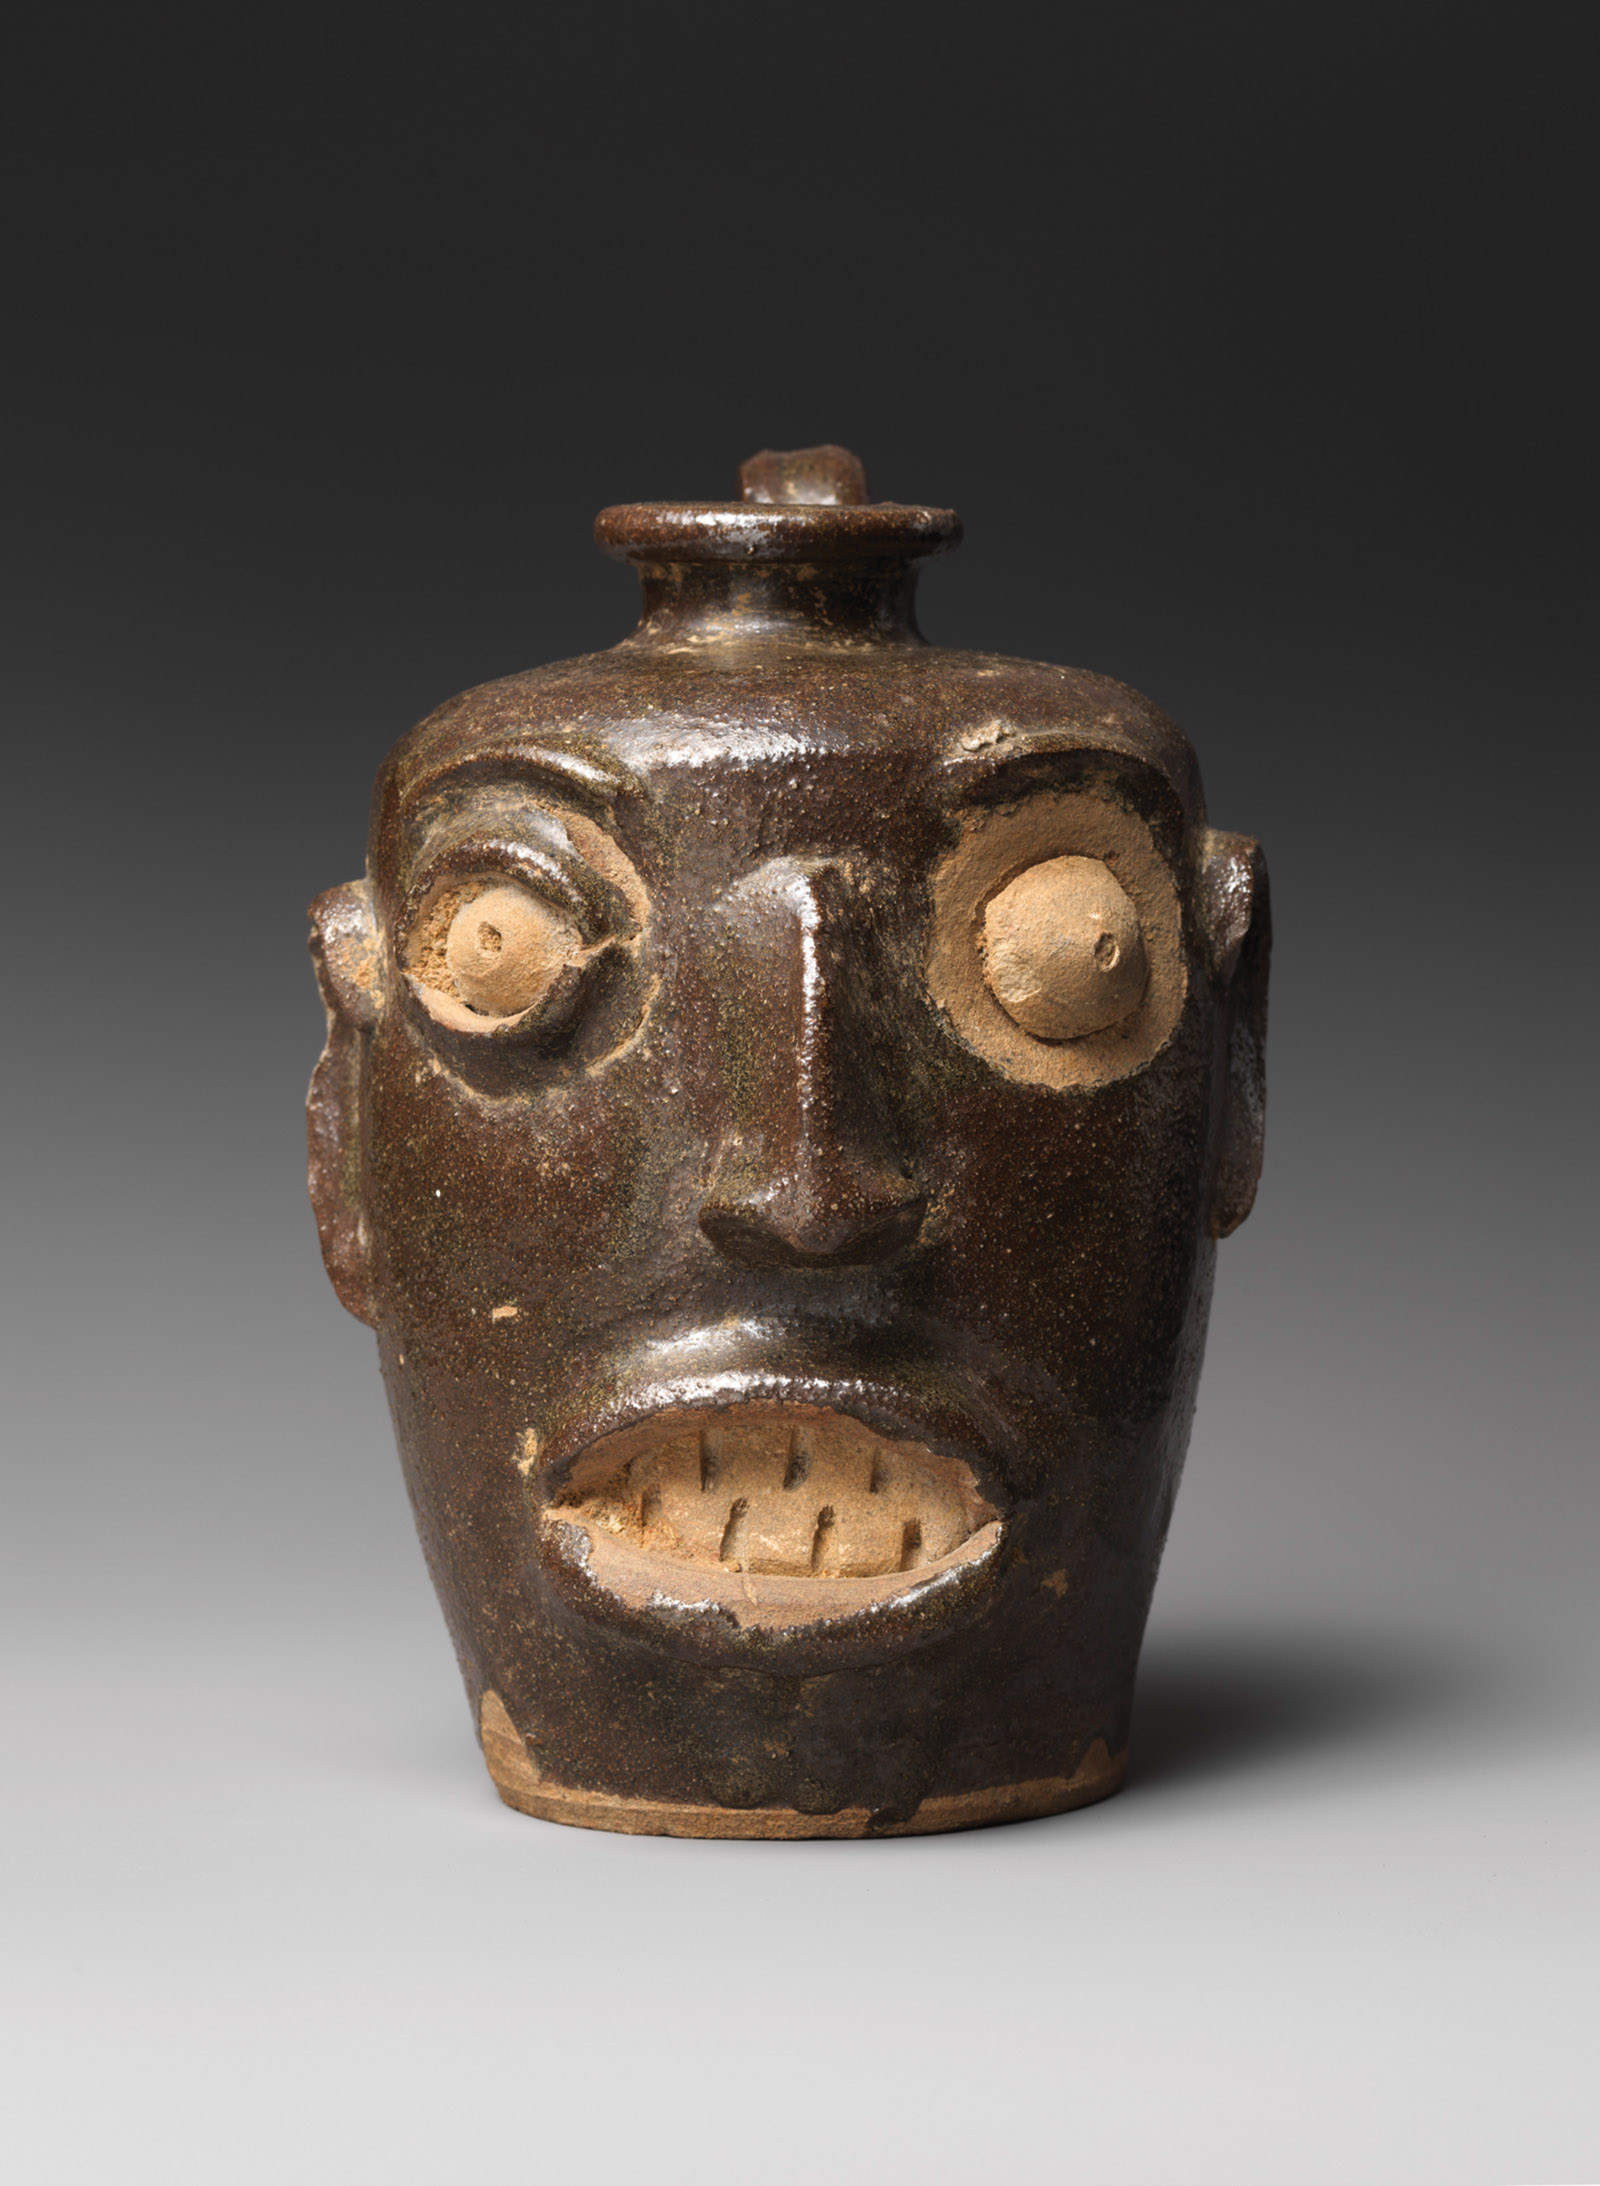 A face vessel by an unrecorded potter